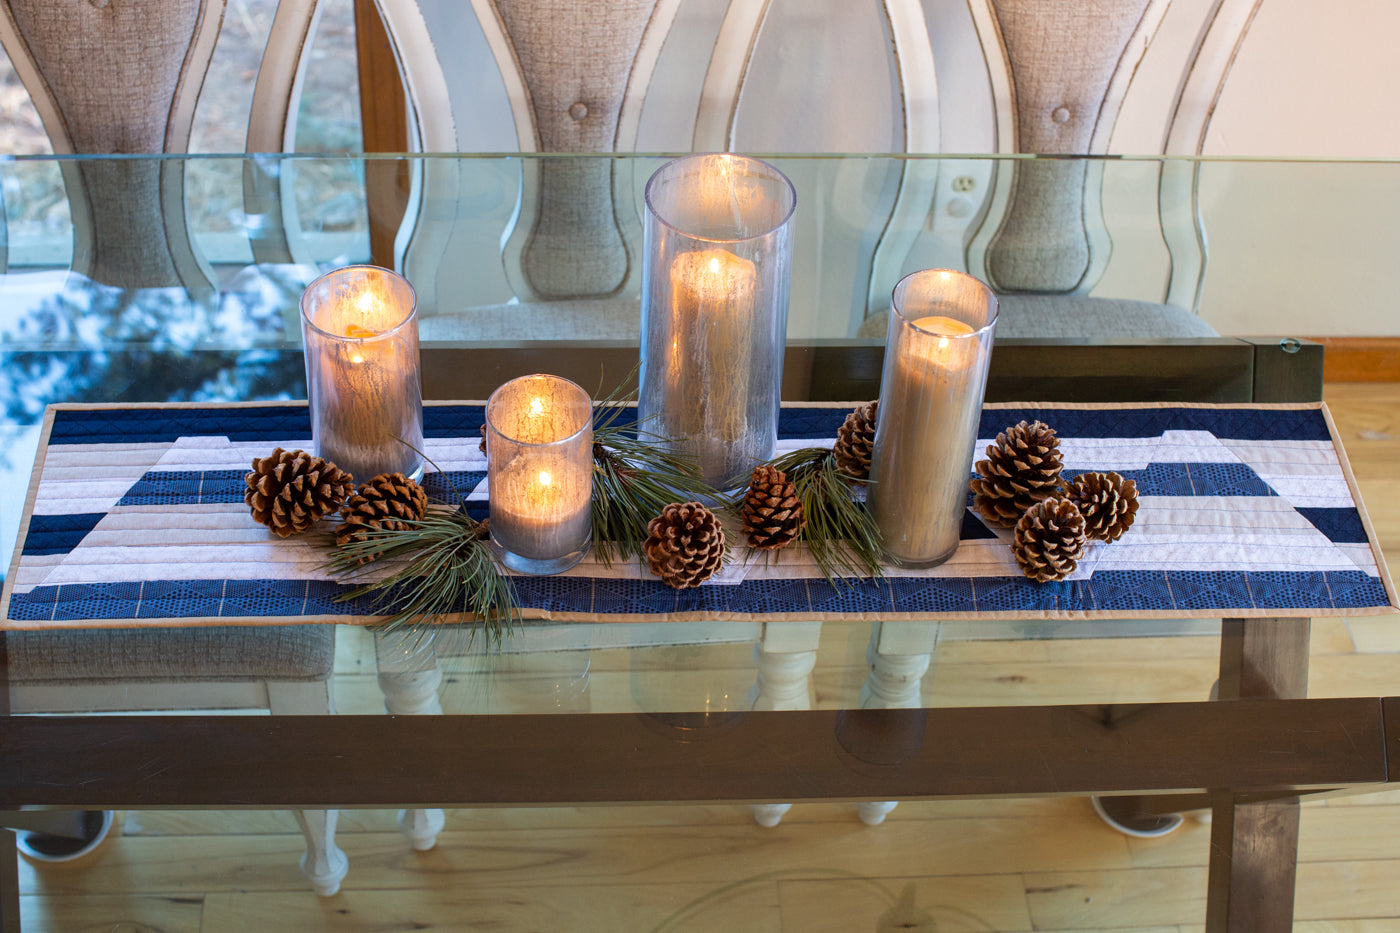 Photograph taken from above the glass kitchen table to showcase the table runner.  On top of the table runner sits lit candles, in tall candle holders, with pinecones and pine needle bunches intertwined.  